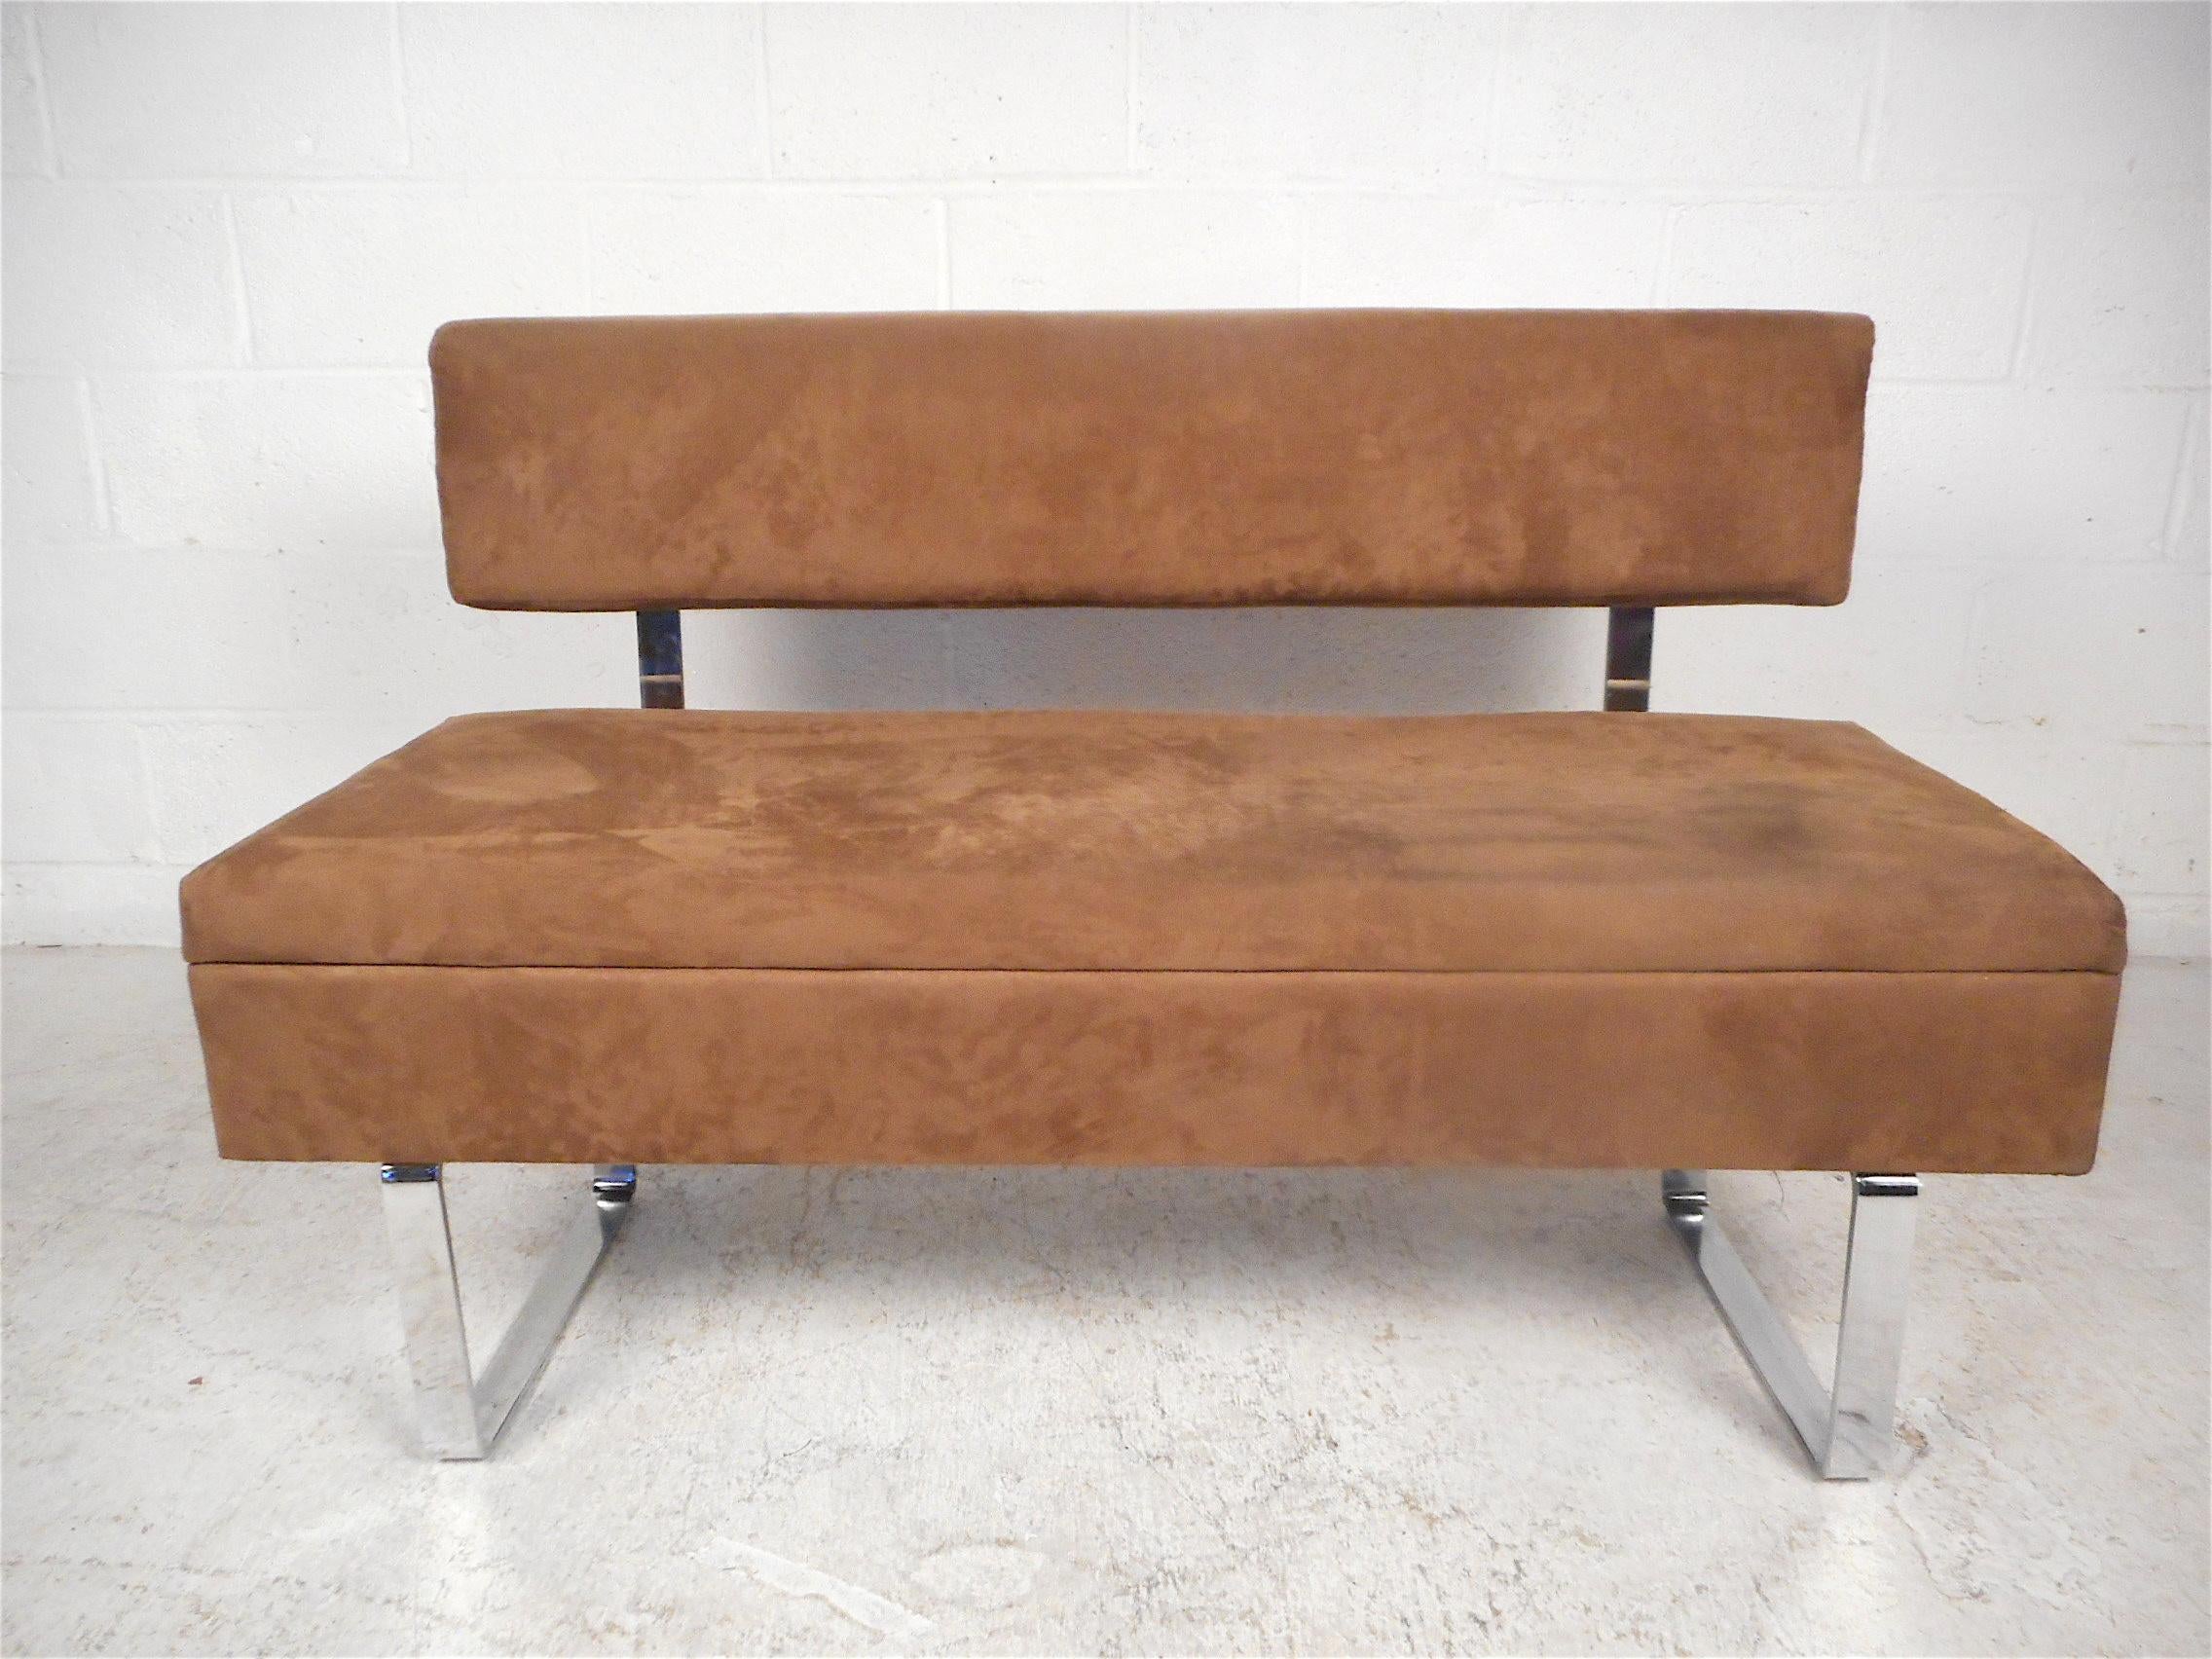 Stylish midcentury bench with upholstered seating and backrests, plus sleek chrome supports and sled legs. The bench's seat lifts up to reveal a storage compartment. A nice mix of style and utility, this bench is sure to please in any modern